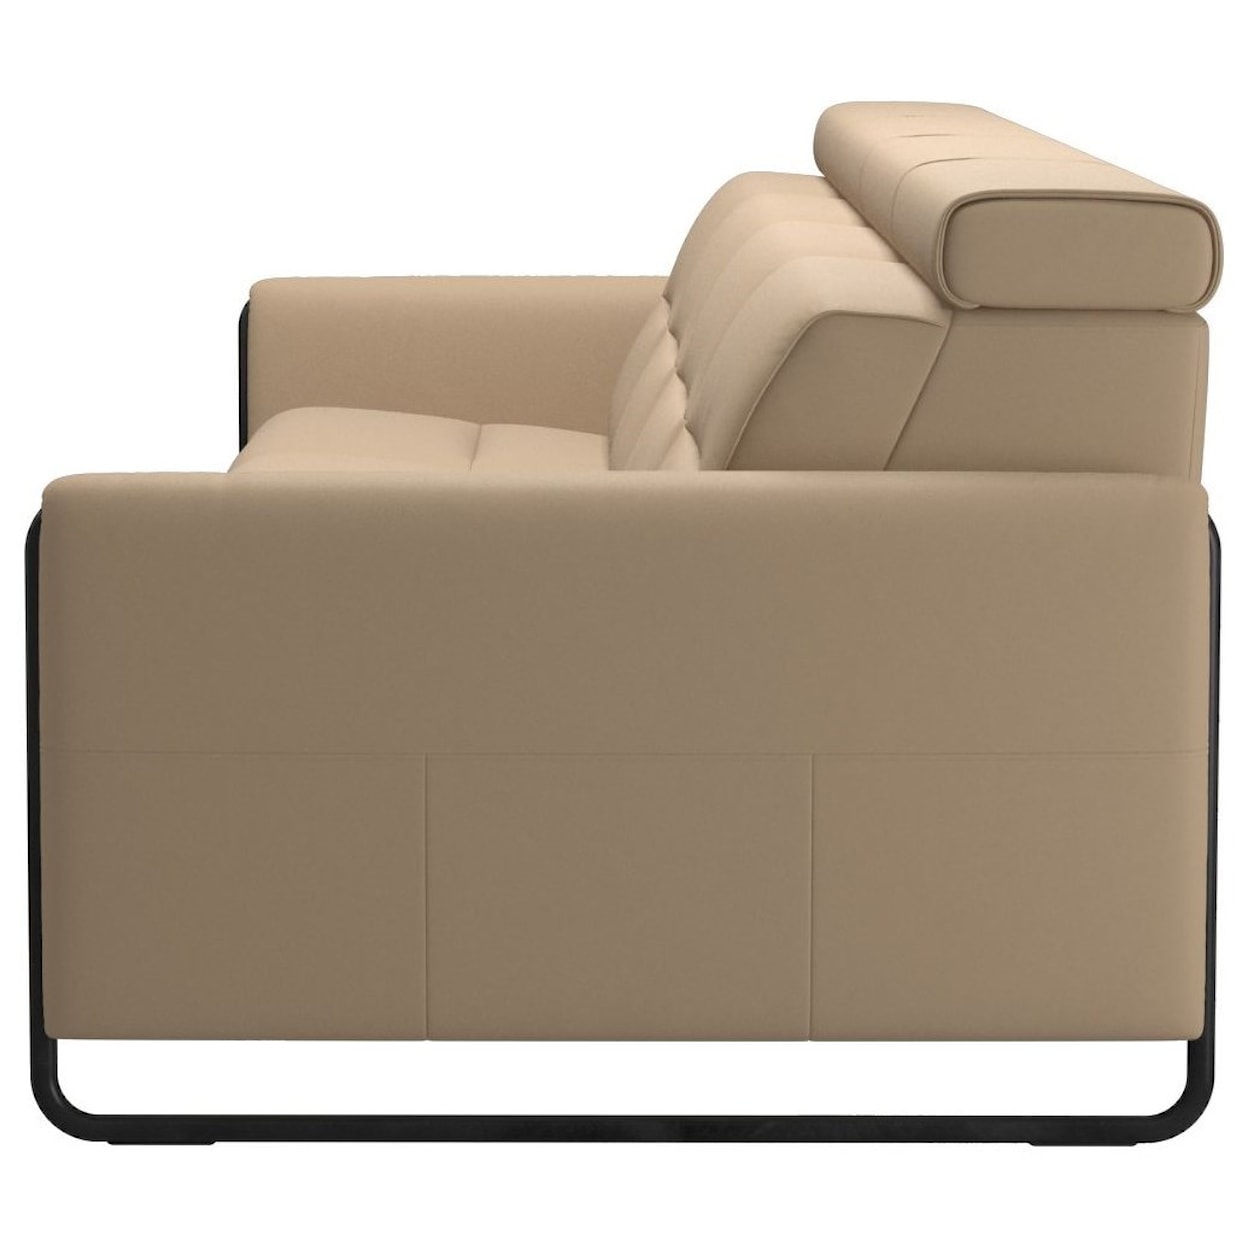 Stressless by Ekornes Emily Power 4-Seat Sofa with Steel Arms